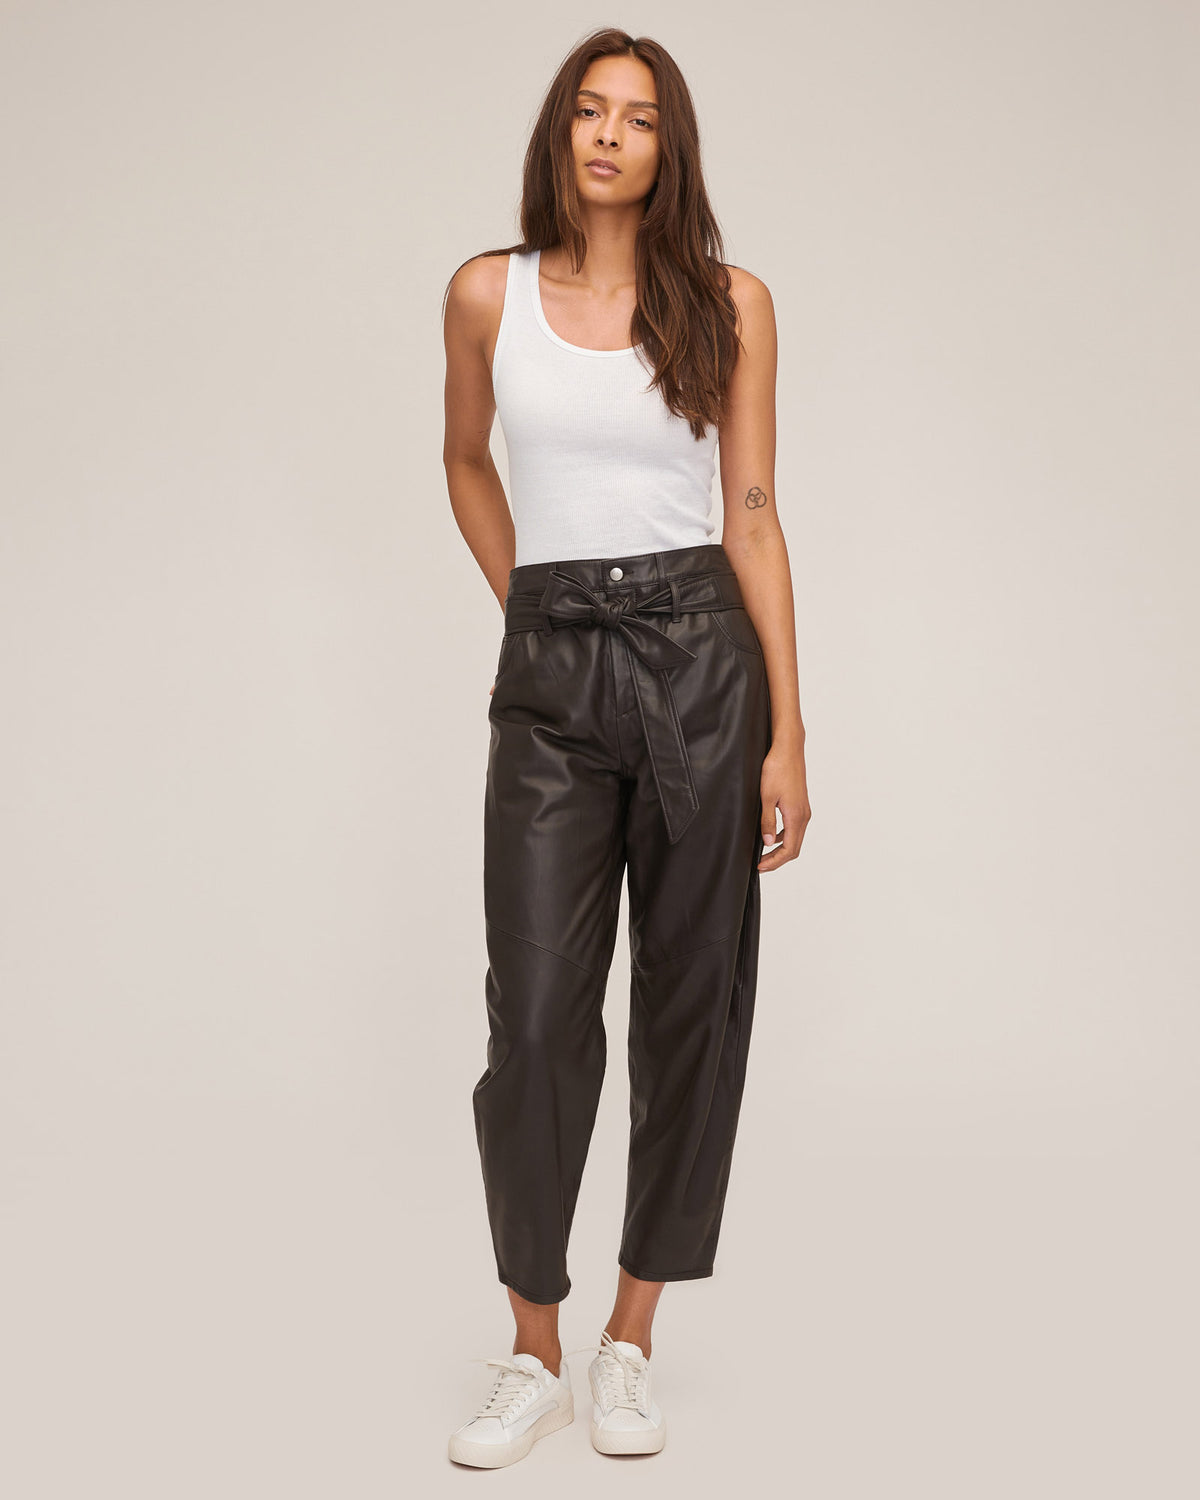 Stevie Barrel Leg Leather Pant in Chocolate